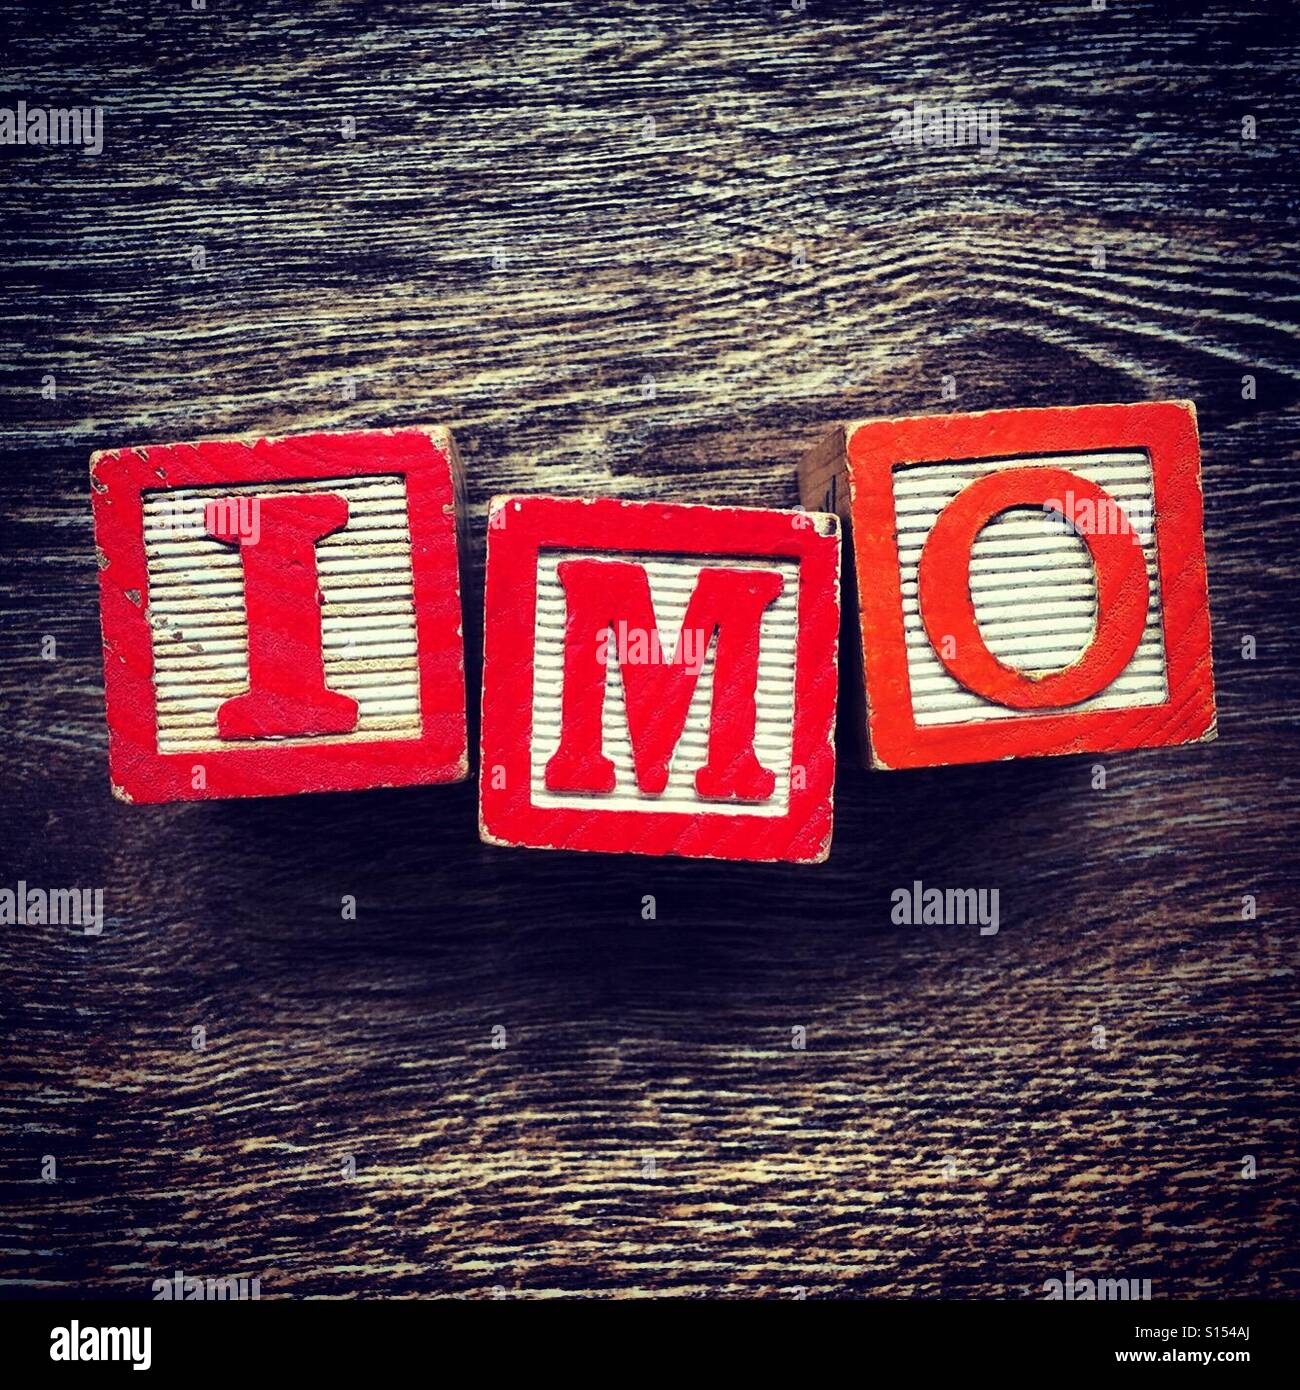 IMO abbreviation written with alphabet wood block letter toys Stock Photo